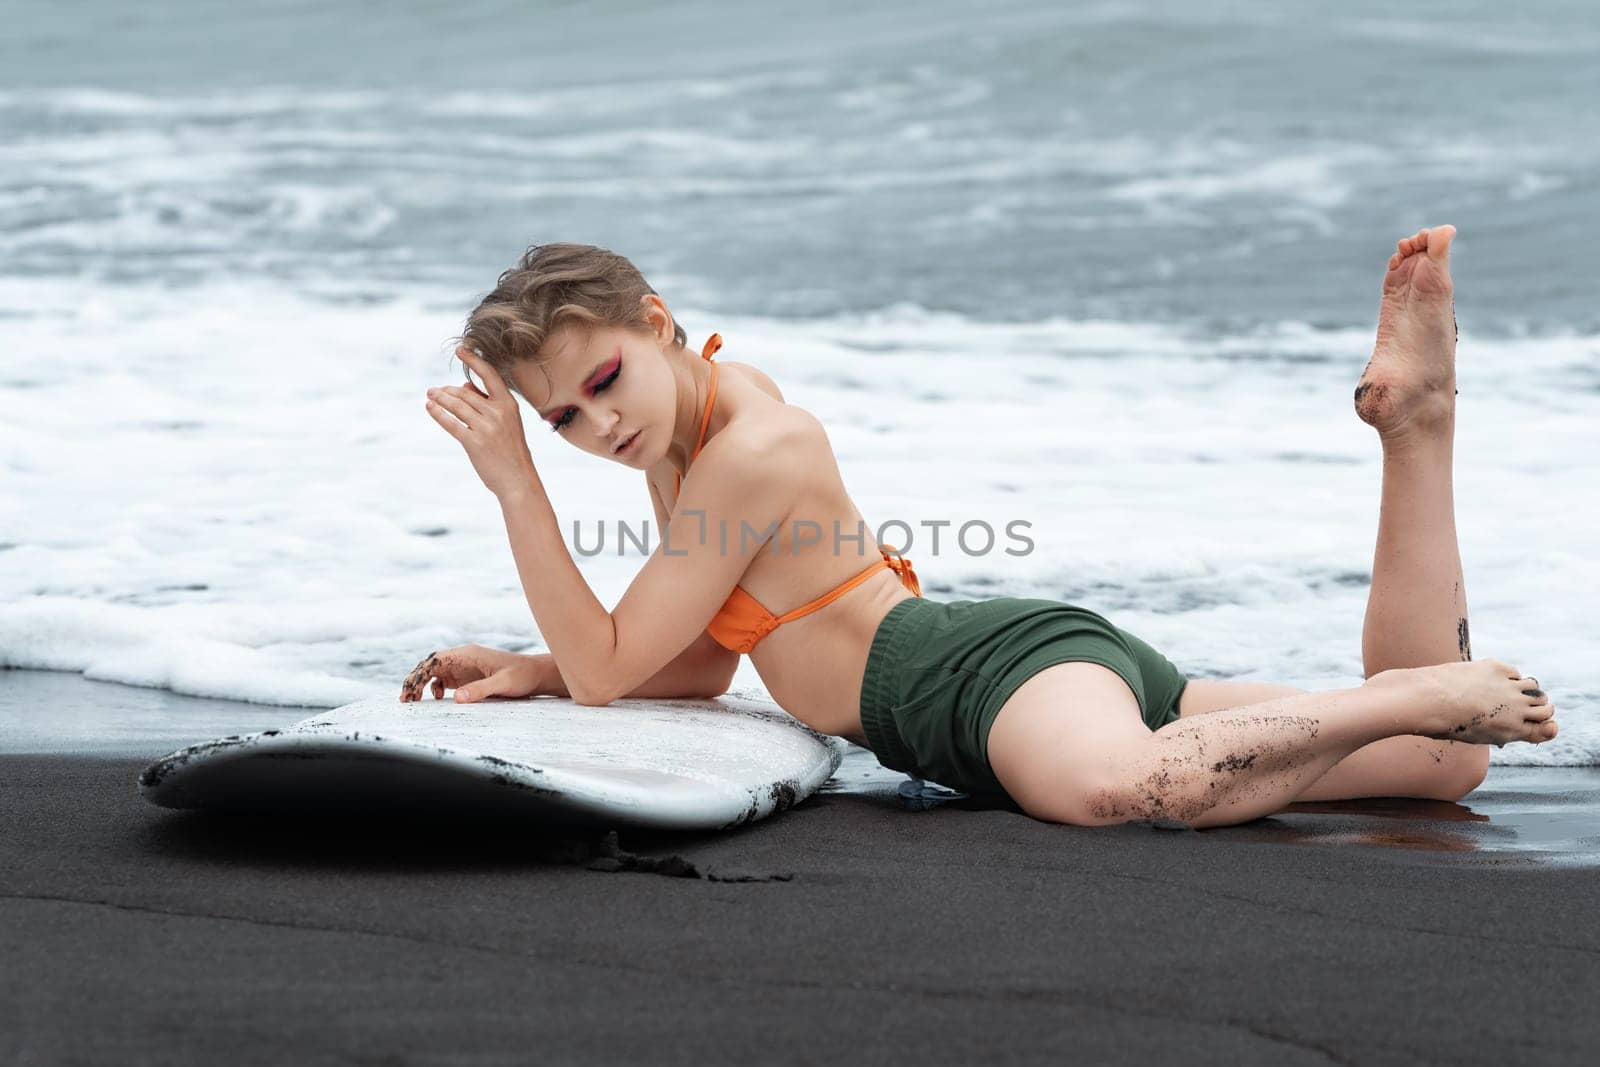 Dreamy sexy surfer is lying on black sand of Pacific Ocean beach with surfboard, showing off fit and athletic body. Sexuality sportswoman relaxing after sports training during summer beach vacation